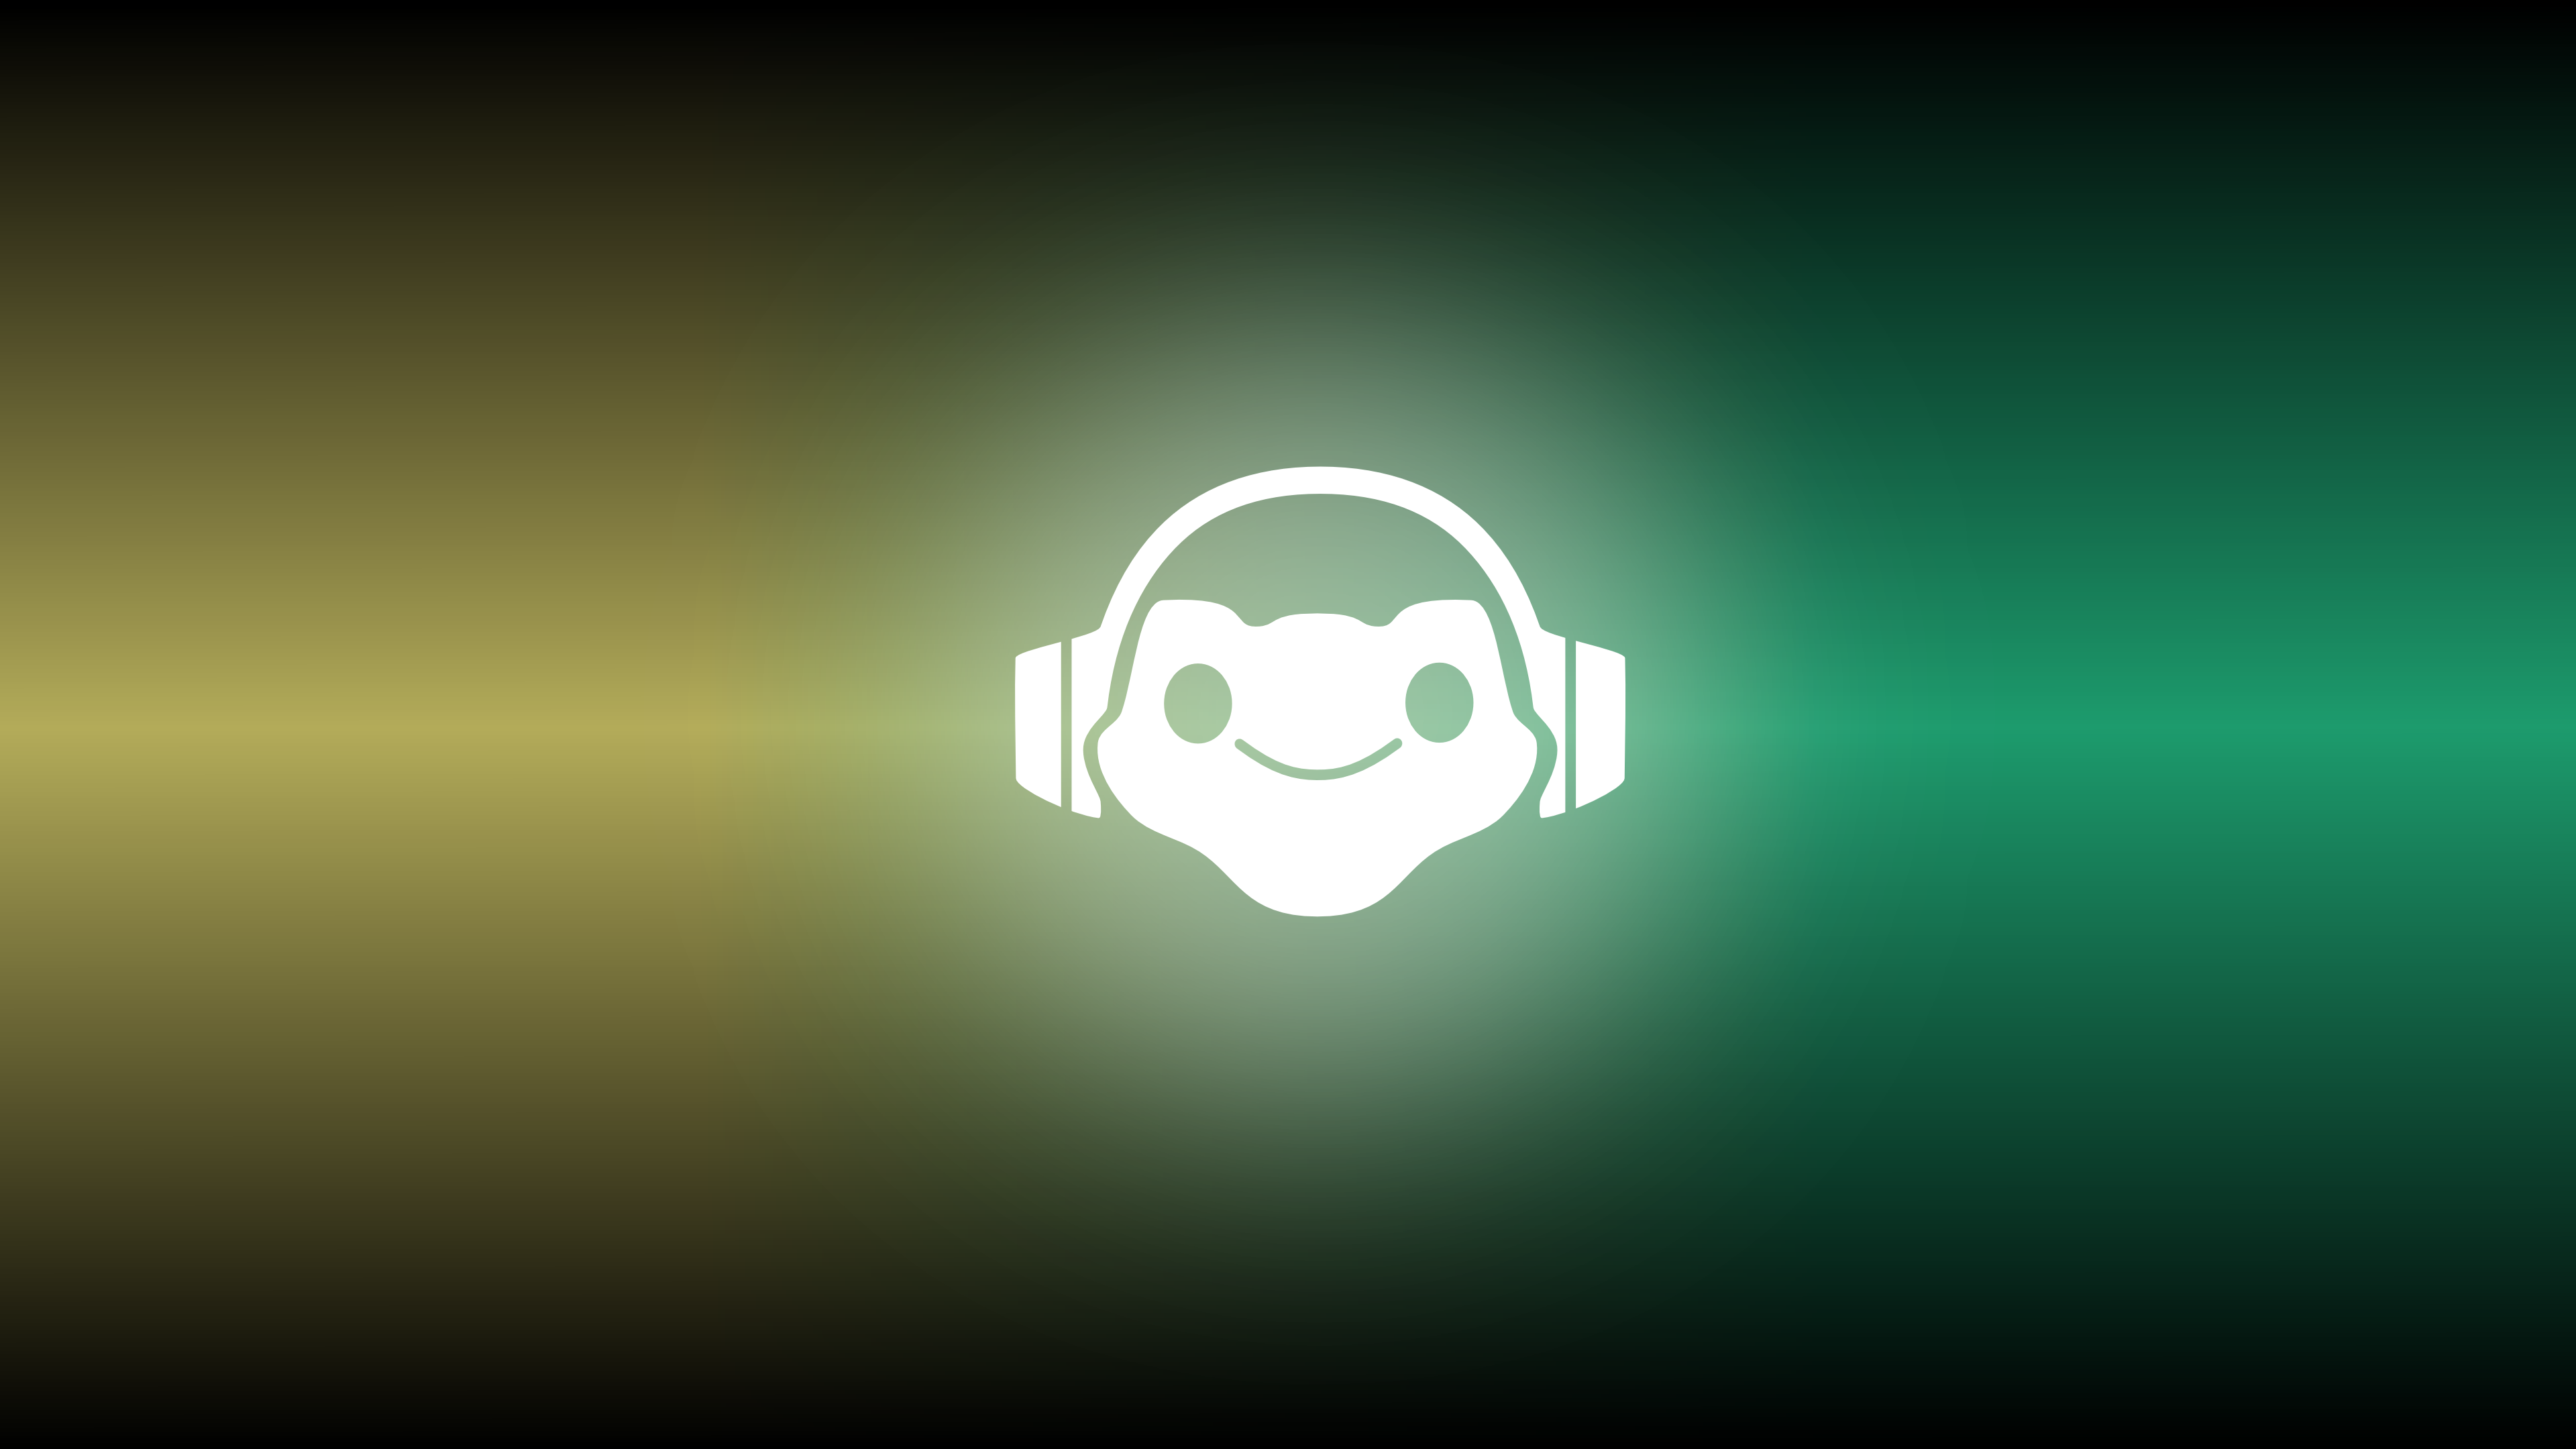 Squid Game Animated Audio Responsive Wallpaper by ParzivalV on